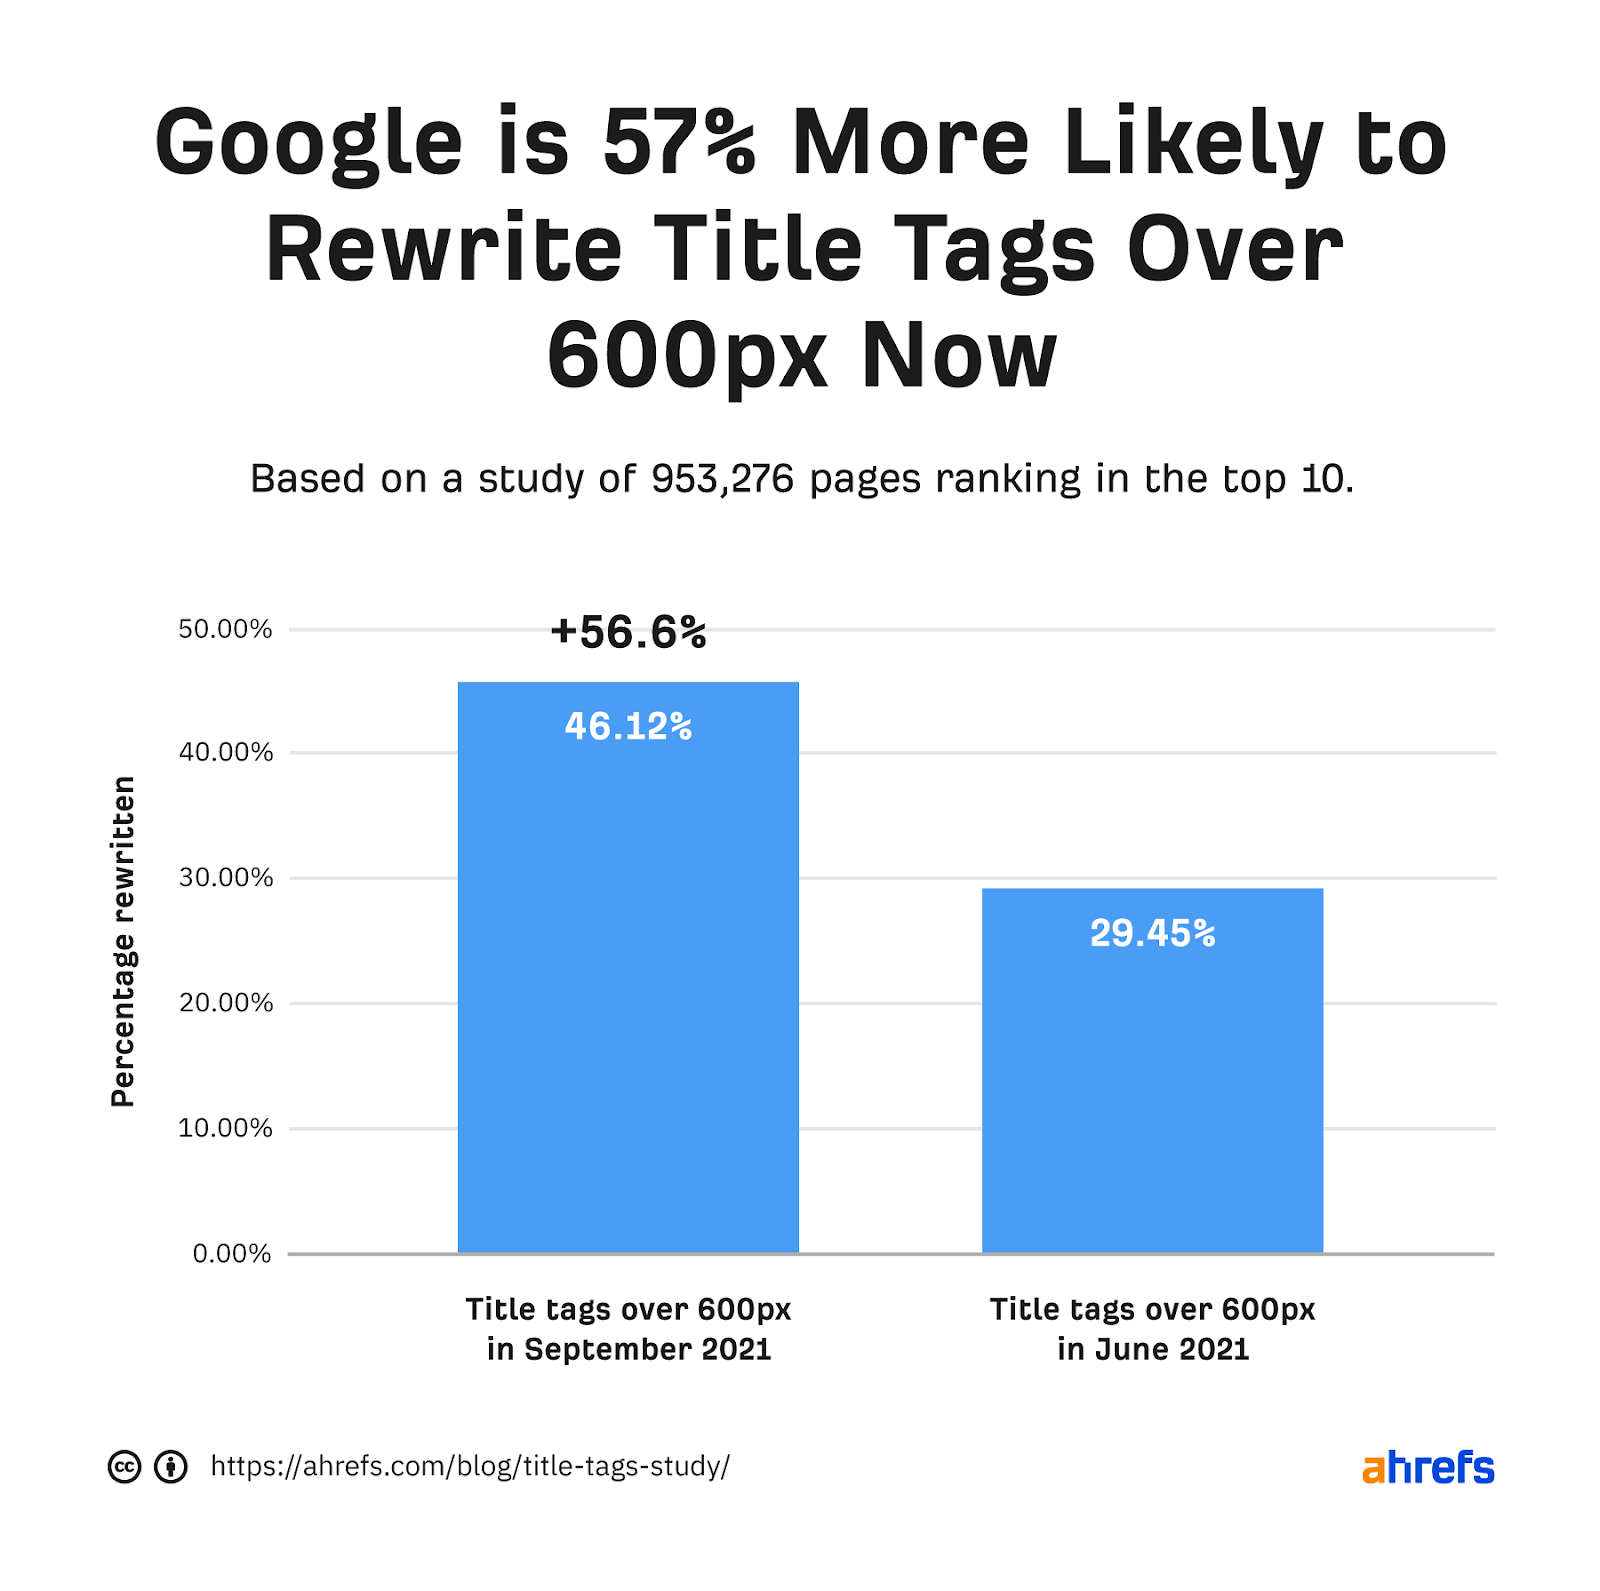 Bar chart showing Google is 57% more likely to rewrite title tags over 600px now